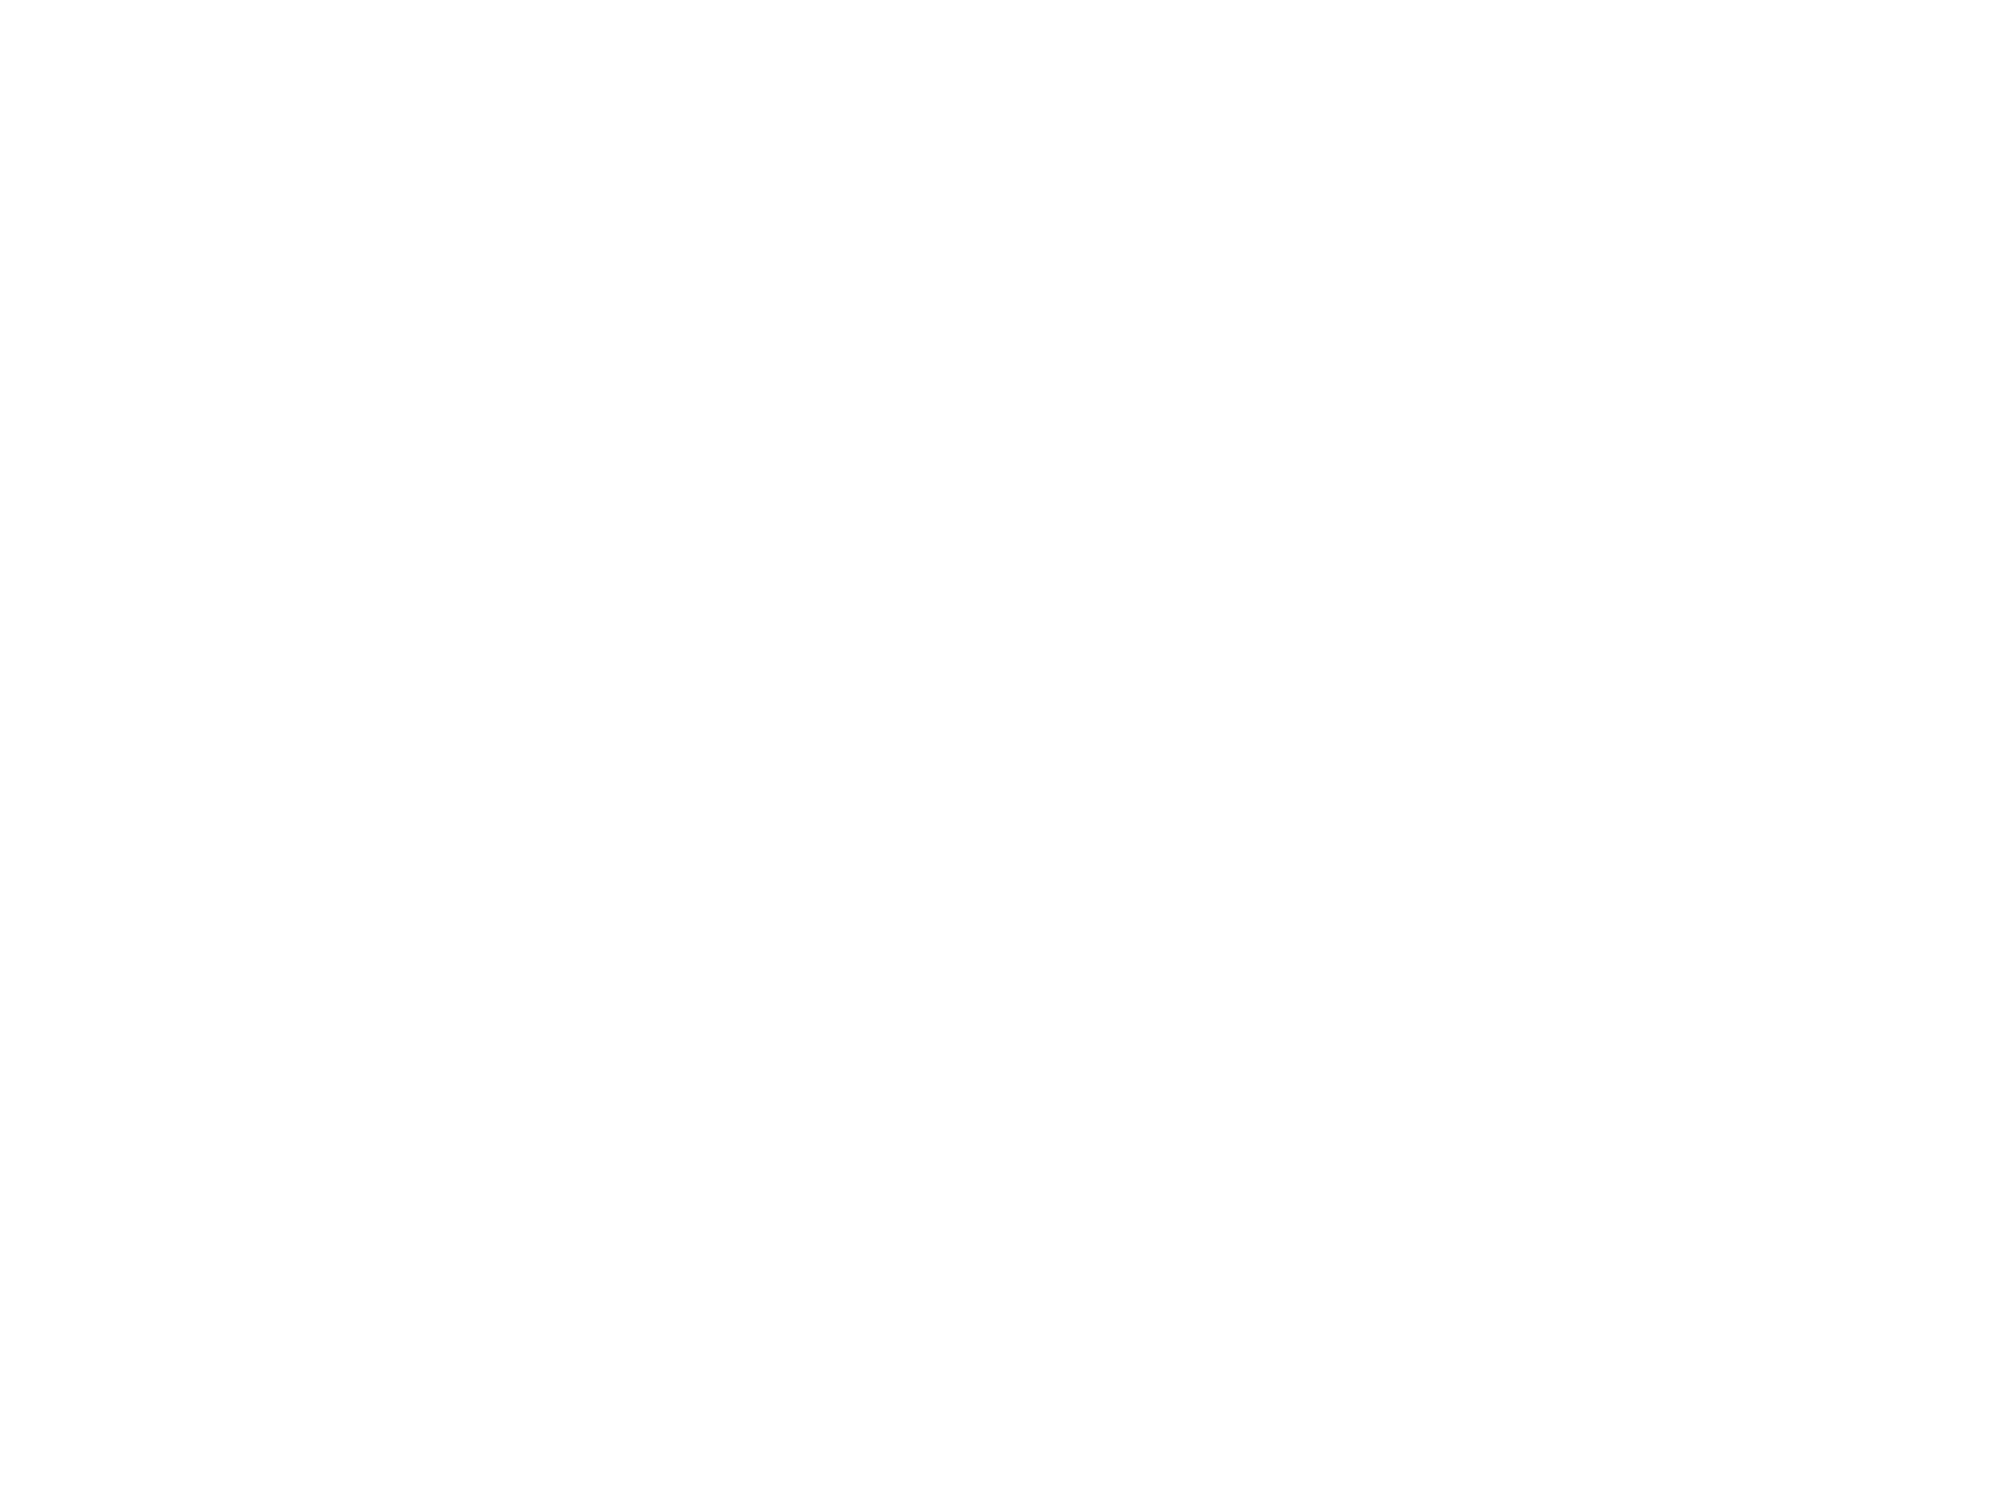 Hours and Miles